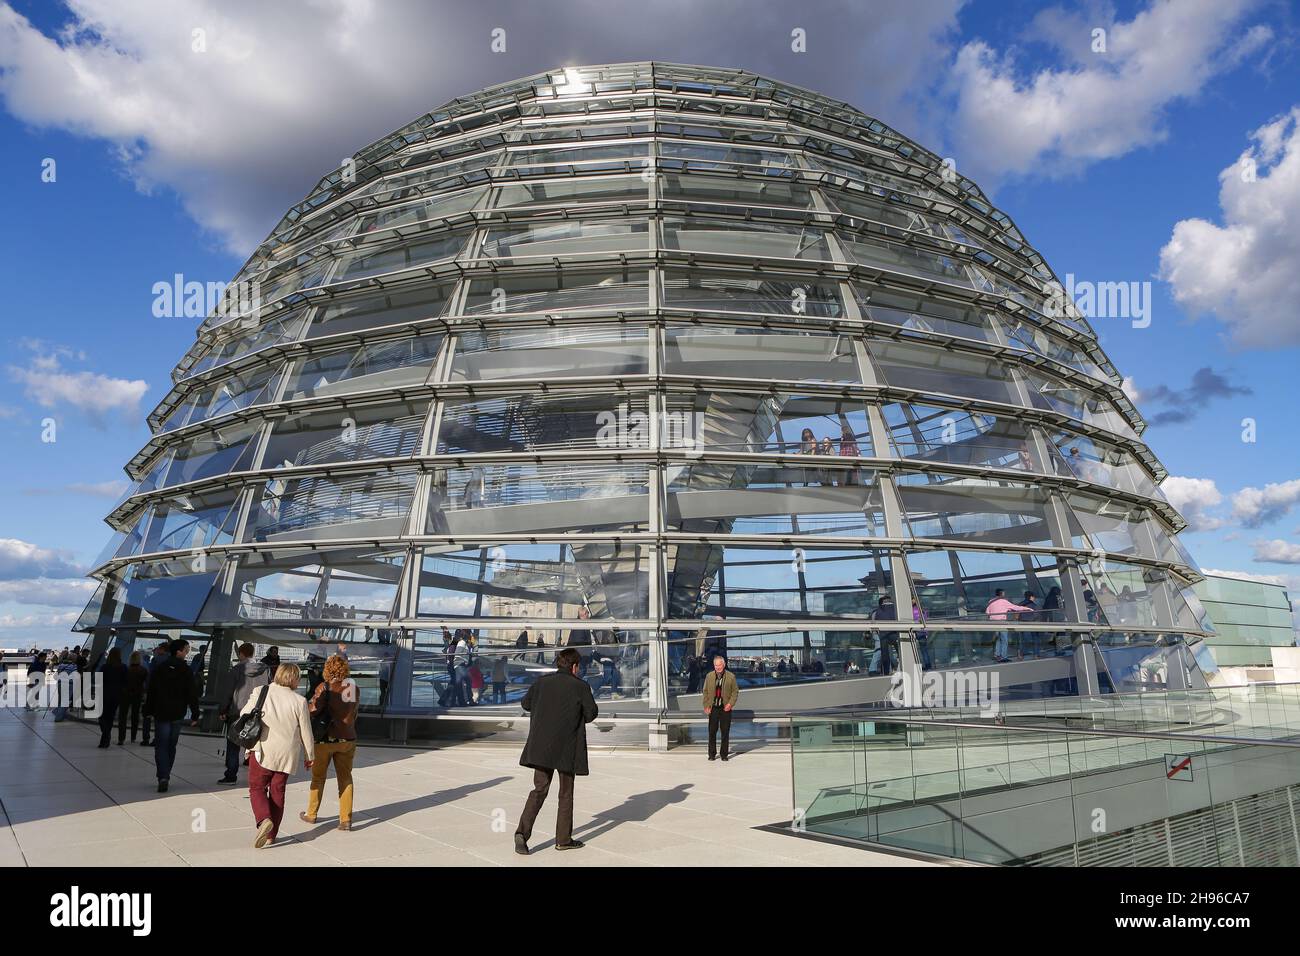 The Reichstag dome on the roof of the German Bundestag in Berlin Mitte from the outside. Modern architecture made of aluminum, glass and mirrors. Stock Photo